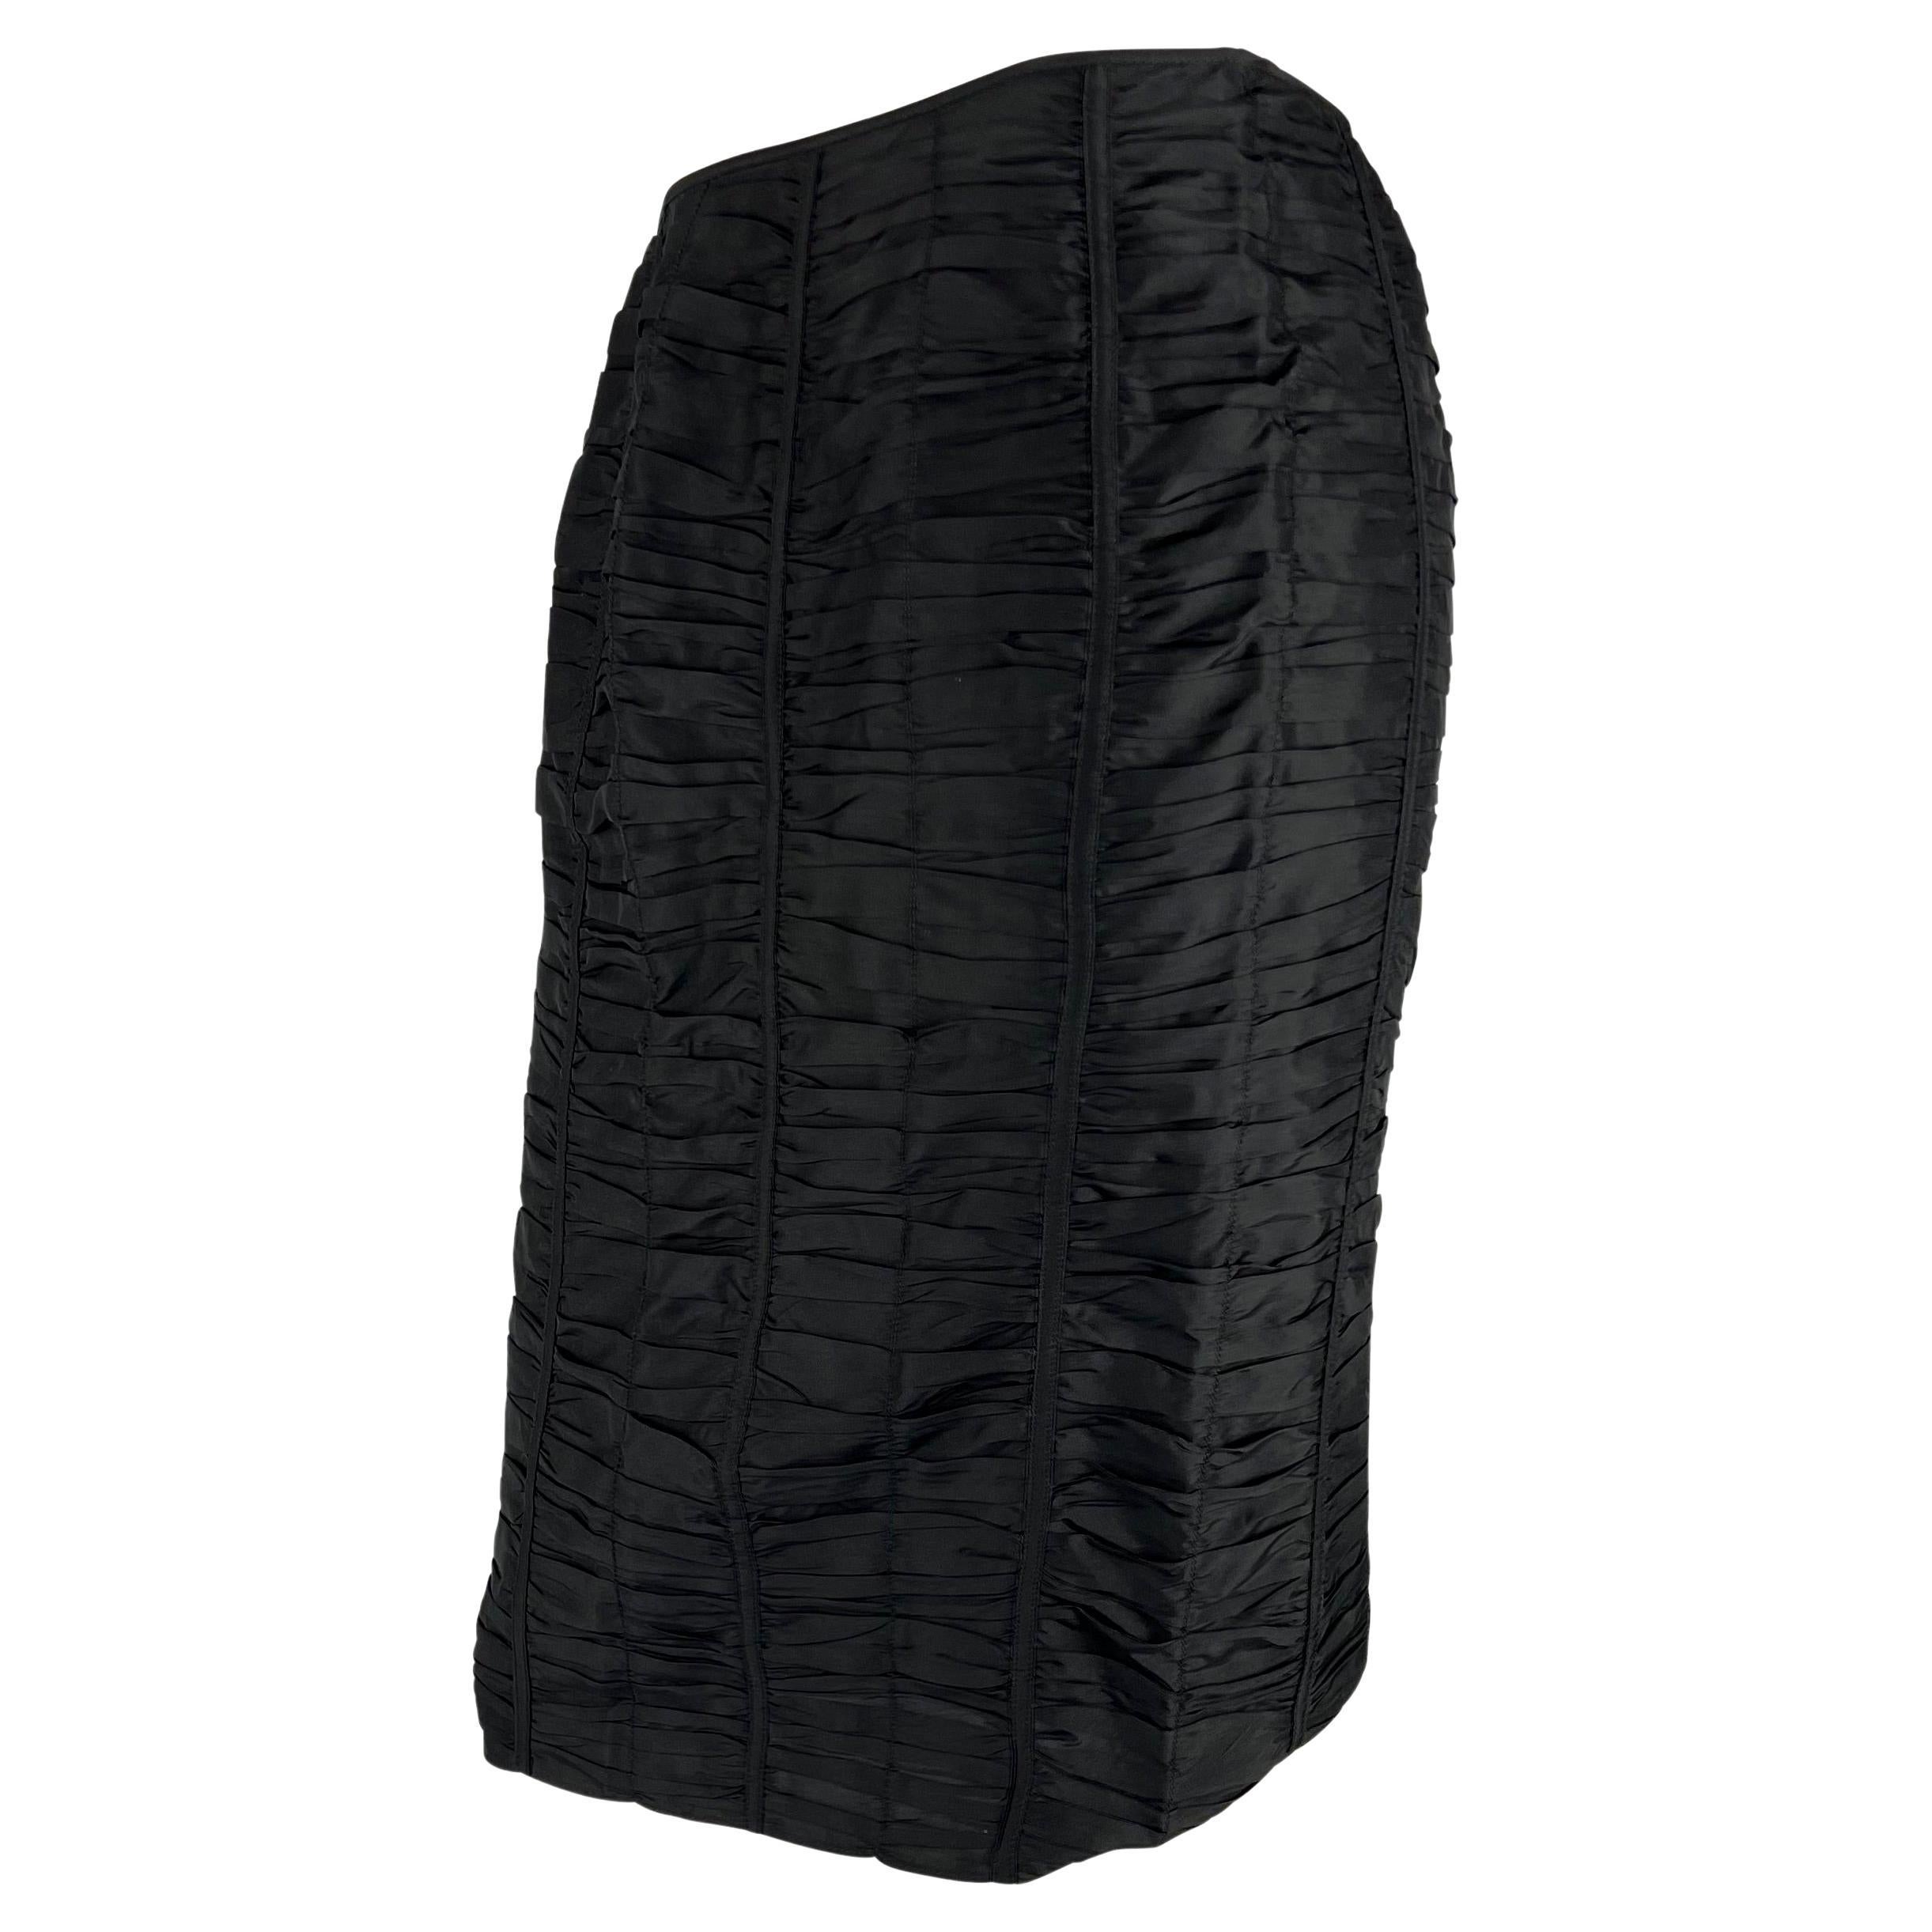 Presenting a black ruched Gucci skirt, designed by Tom Ford. From the Spring/Summer 2001 collection, this silk skirt features panels of sewn-down ruches and a silt at the back. This 'new old stock' piece has never been worn and still has the